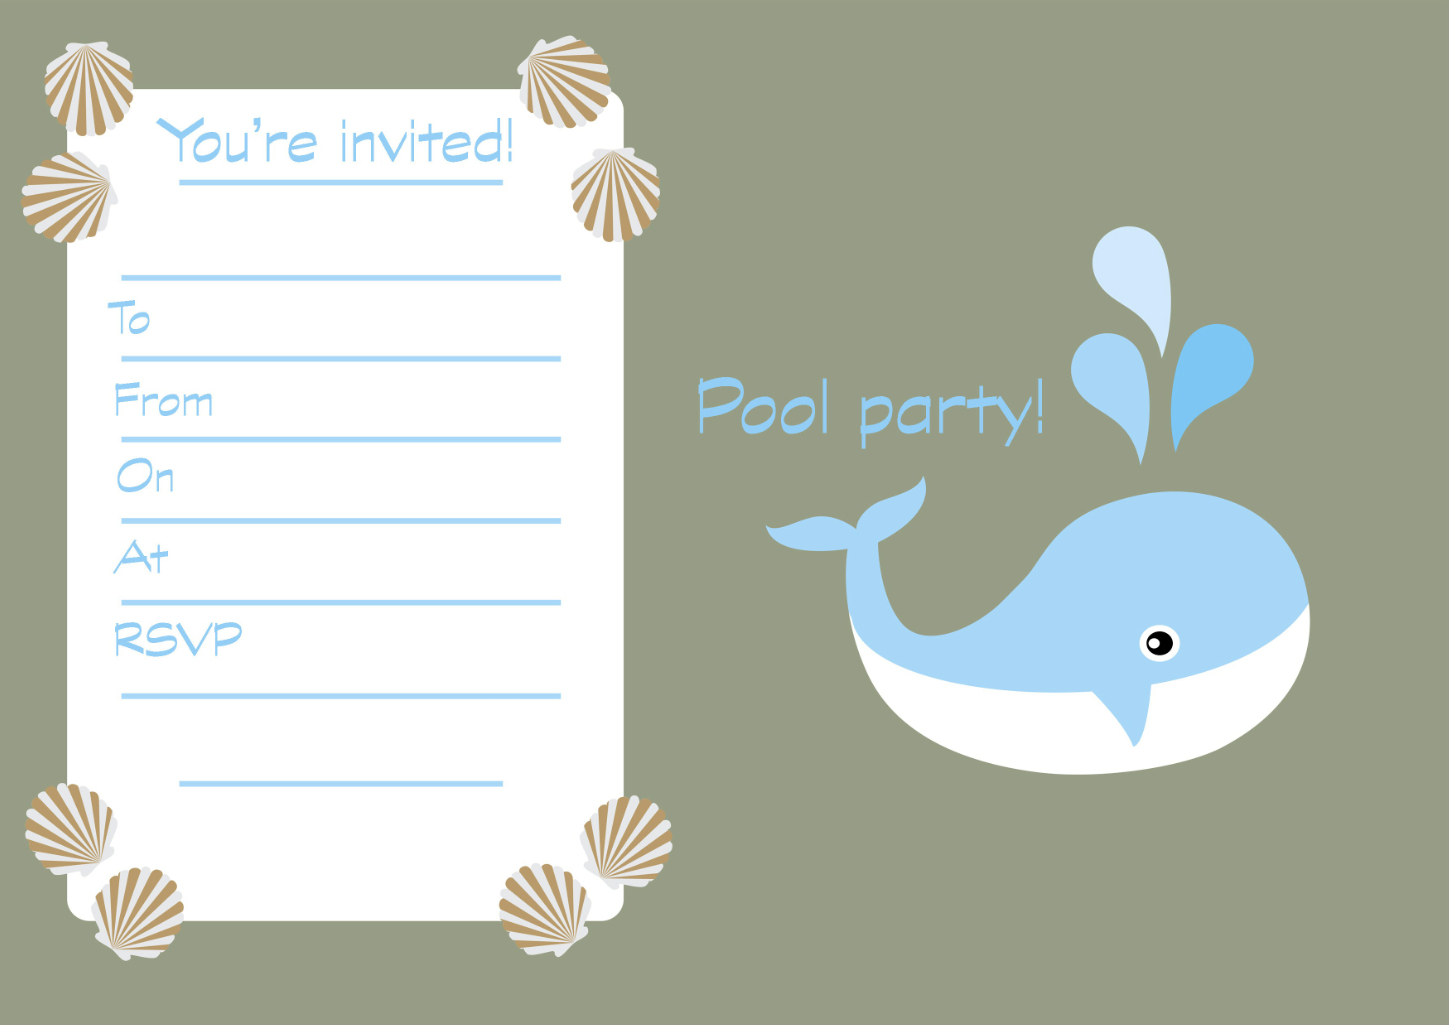 45 Pool Party Invitations | Kittybabylove - Free Printable Pool Party Invitations